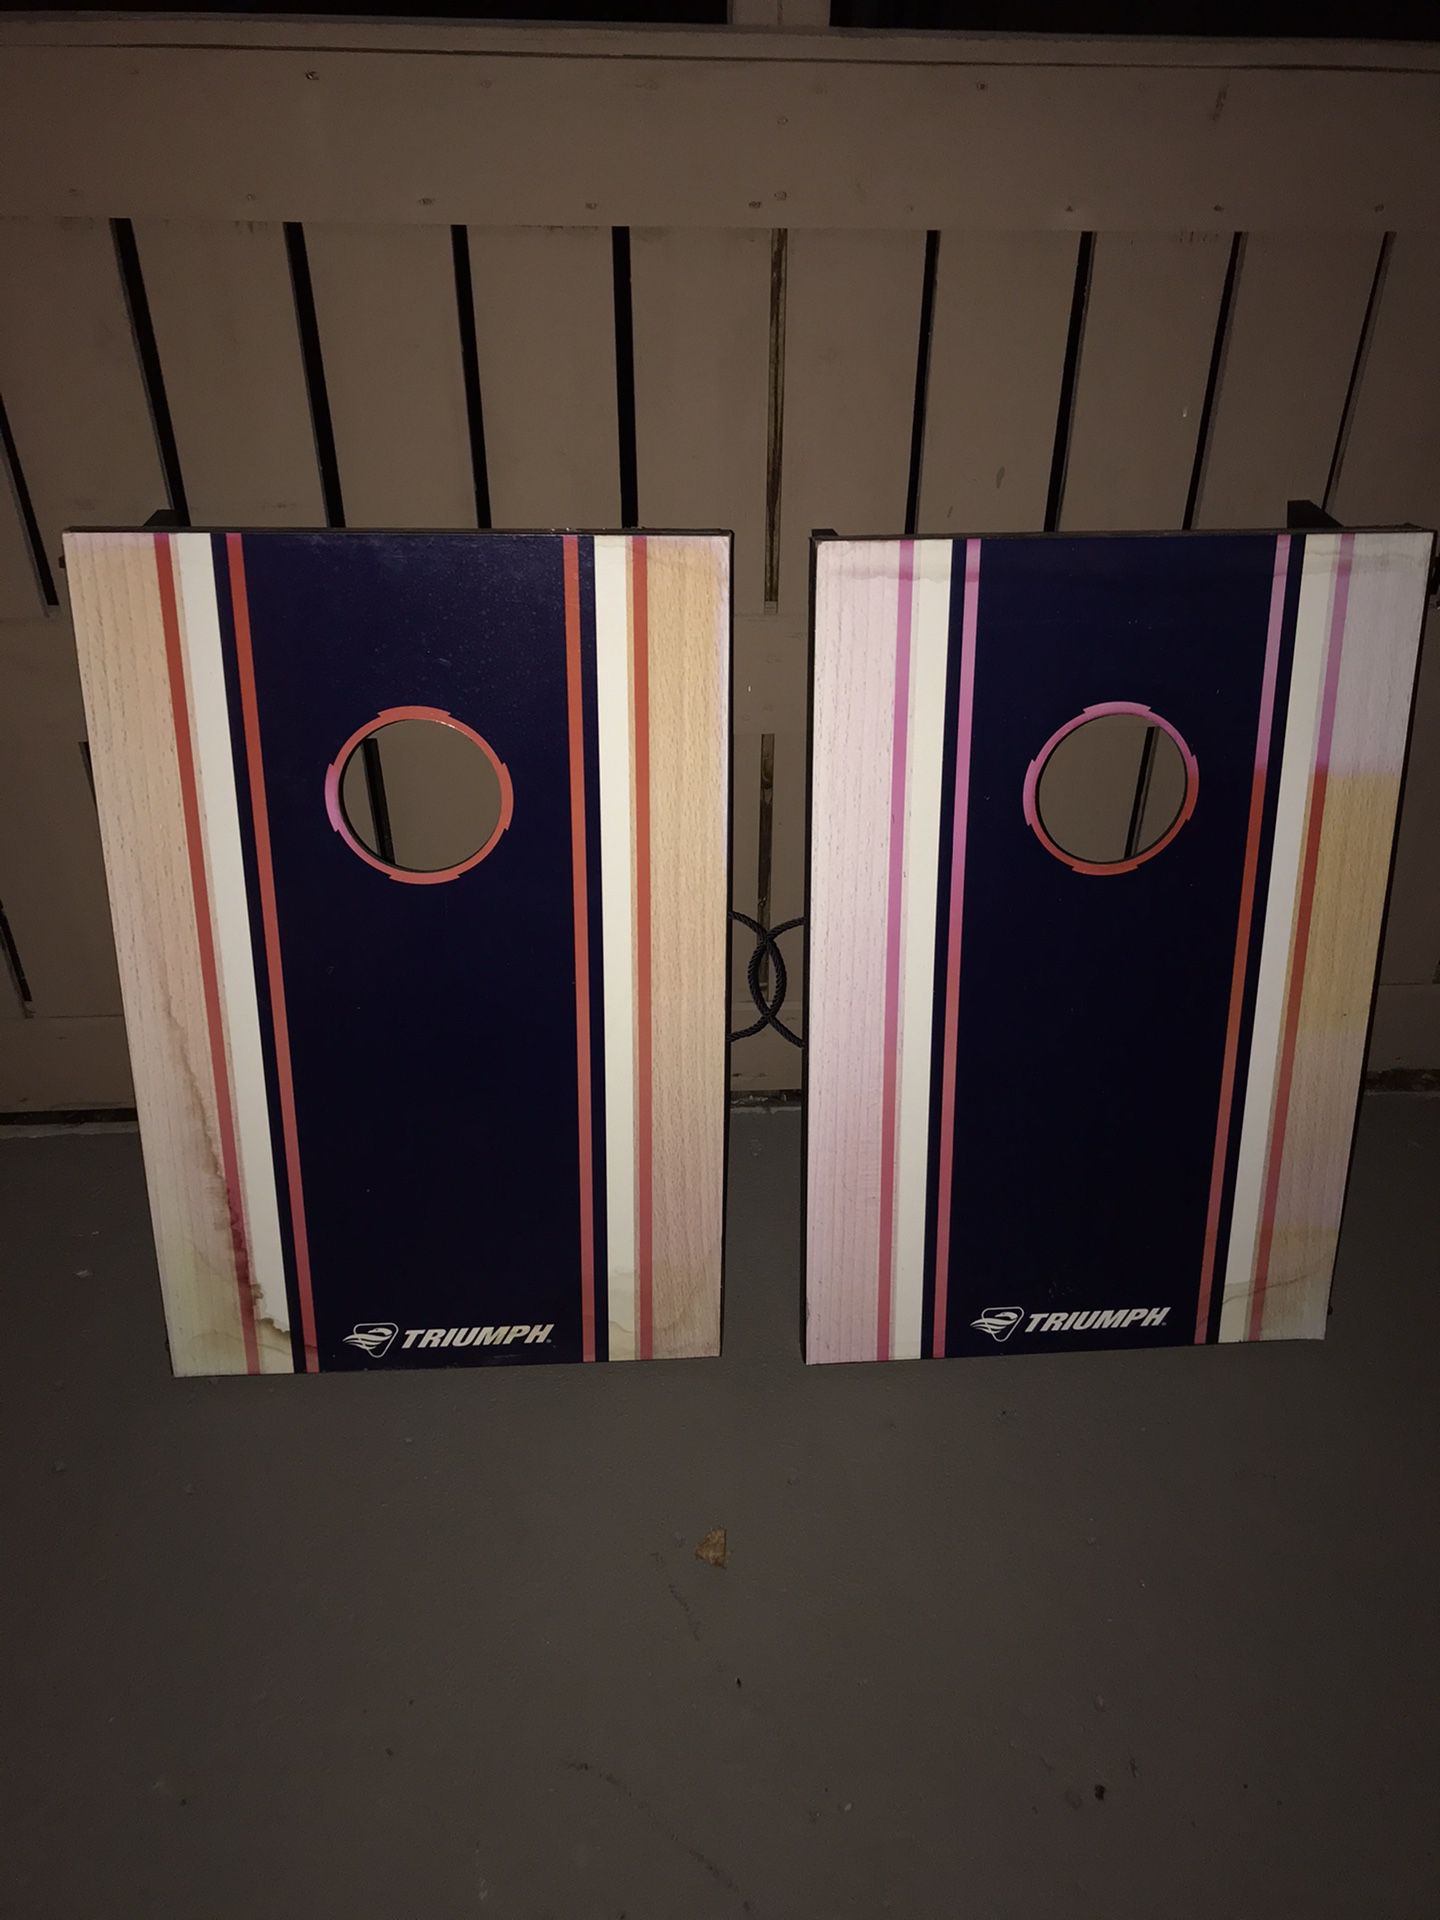 Corn hole boards 35 inches by 29 1/2 inches